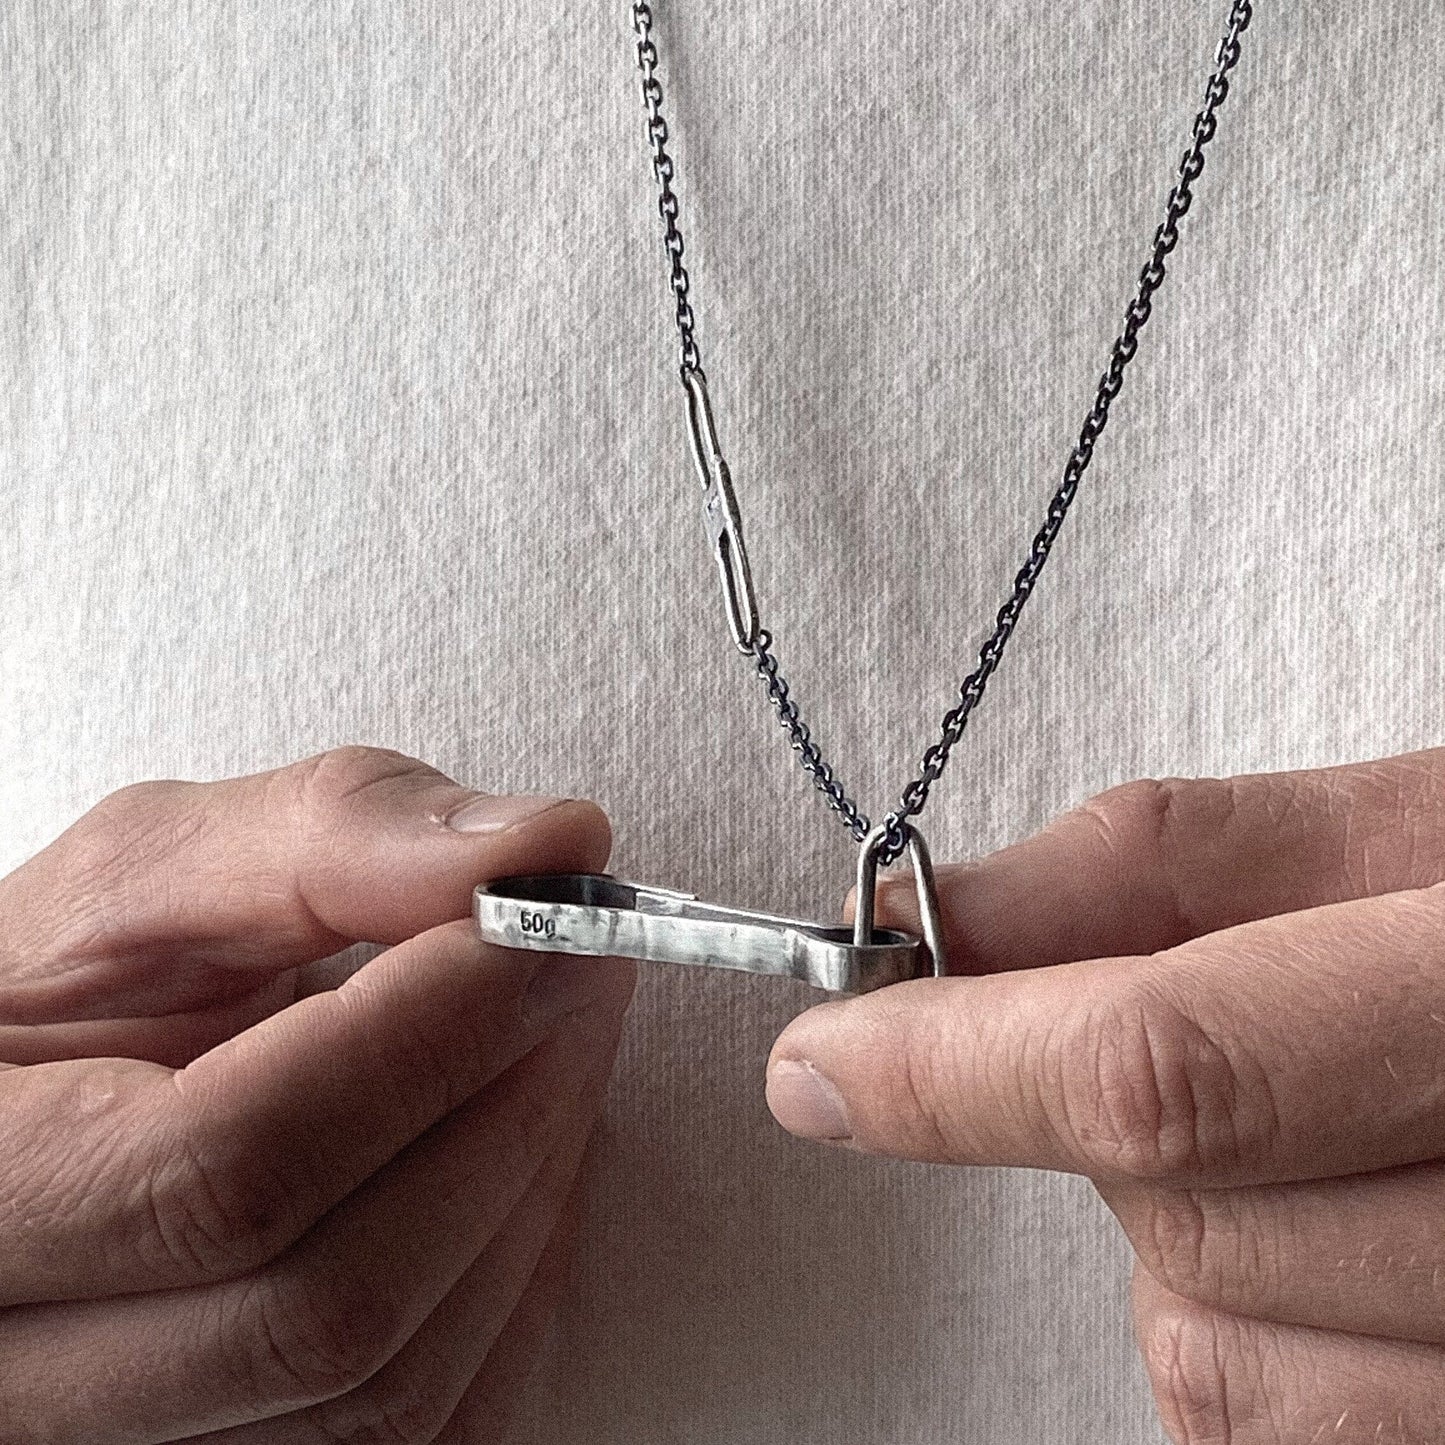 Sterling carbine pendant-brutalist silver pendant with artisan black chain Charms & Pendants Project50g 